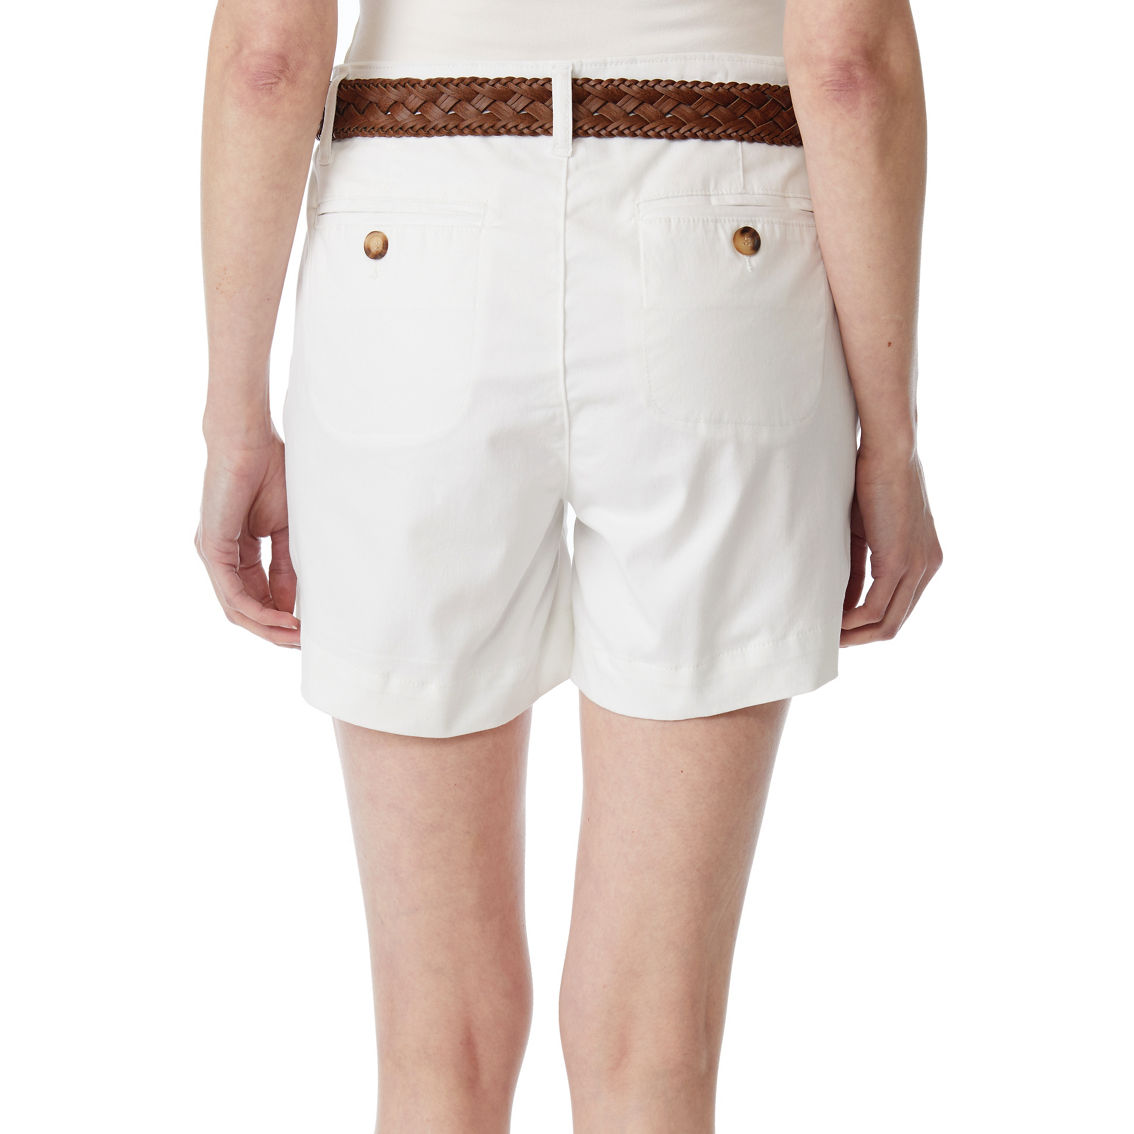 JW Belted Twill Shorts - Image 2 of 2